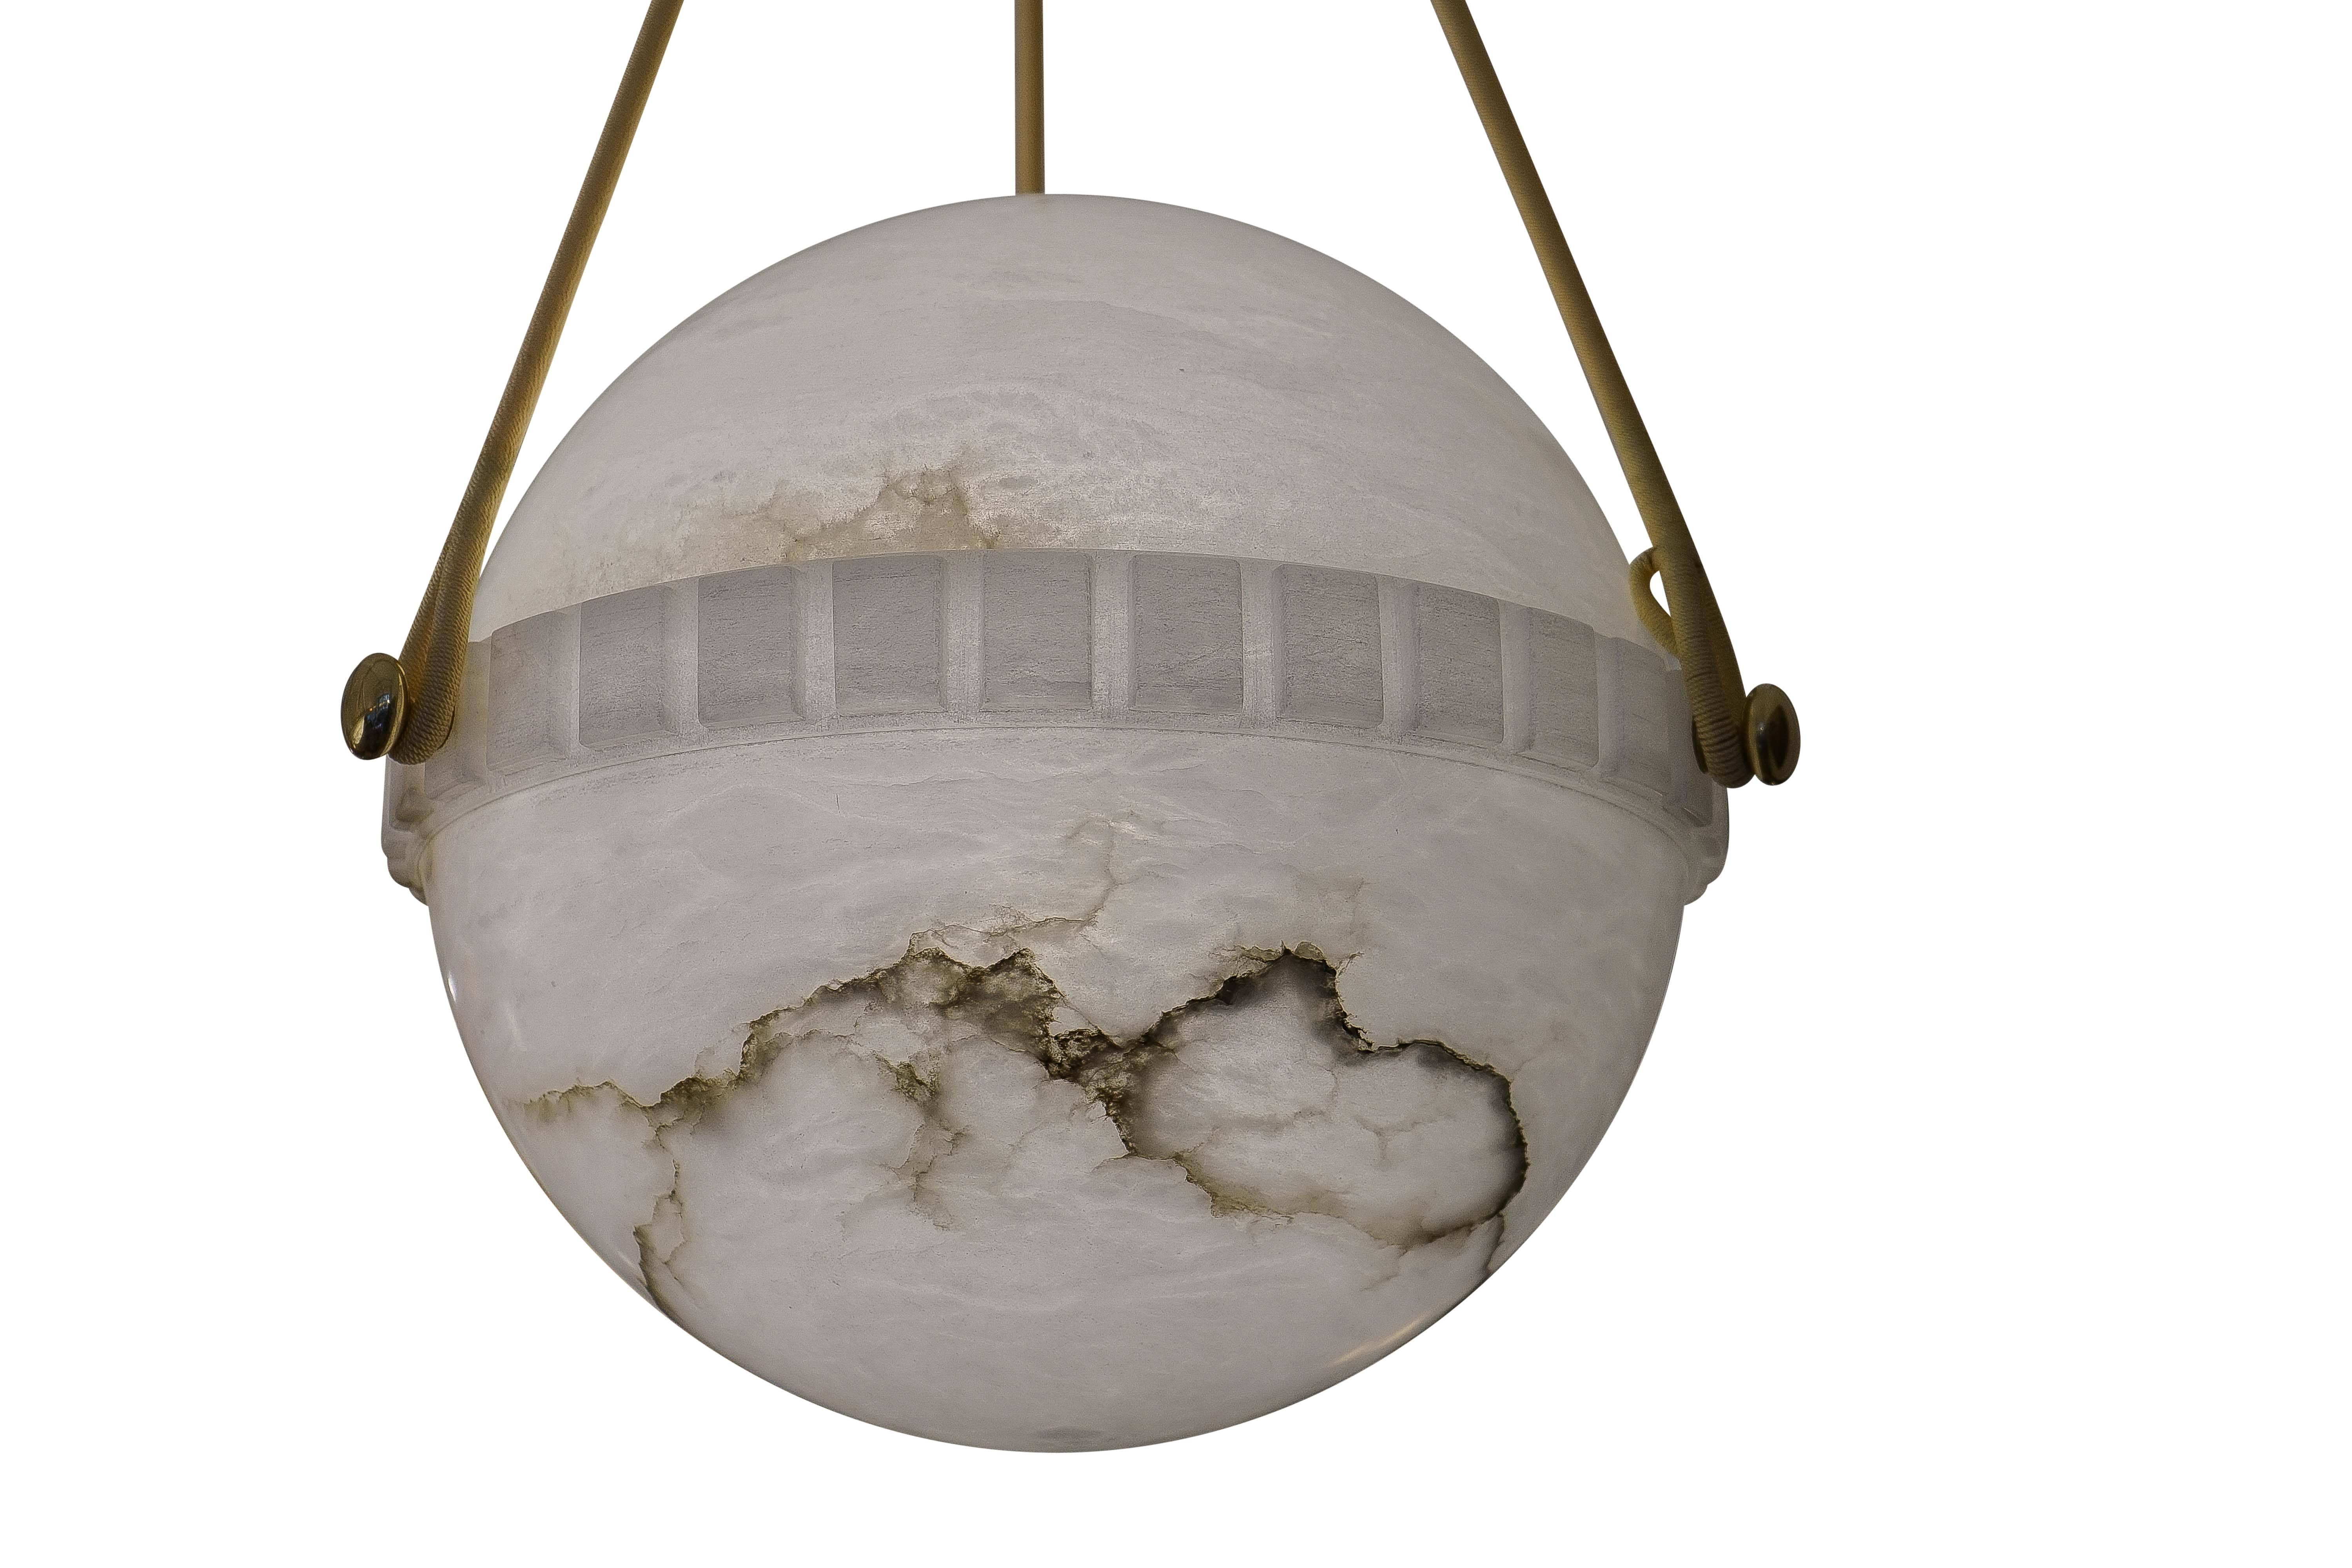 More unusual than the bowl shaped pendants, the globe alabaster features a lower half with a crisp dental motif on the central band and suspends on a set of three brushed nickel flattened balls.  The upper half nestles perfectly into the banding and